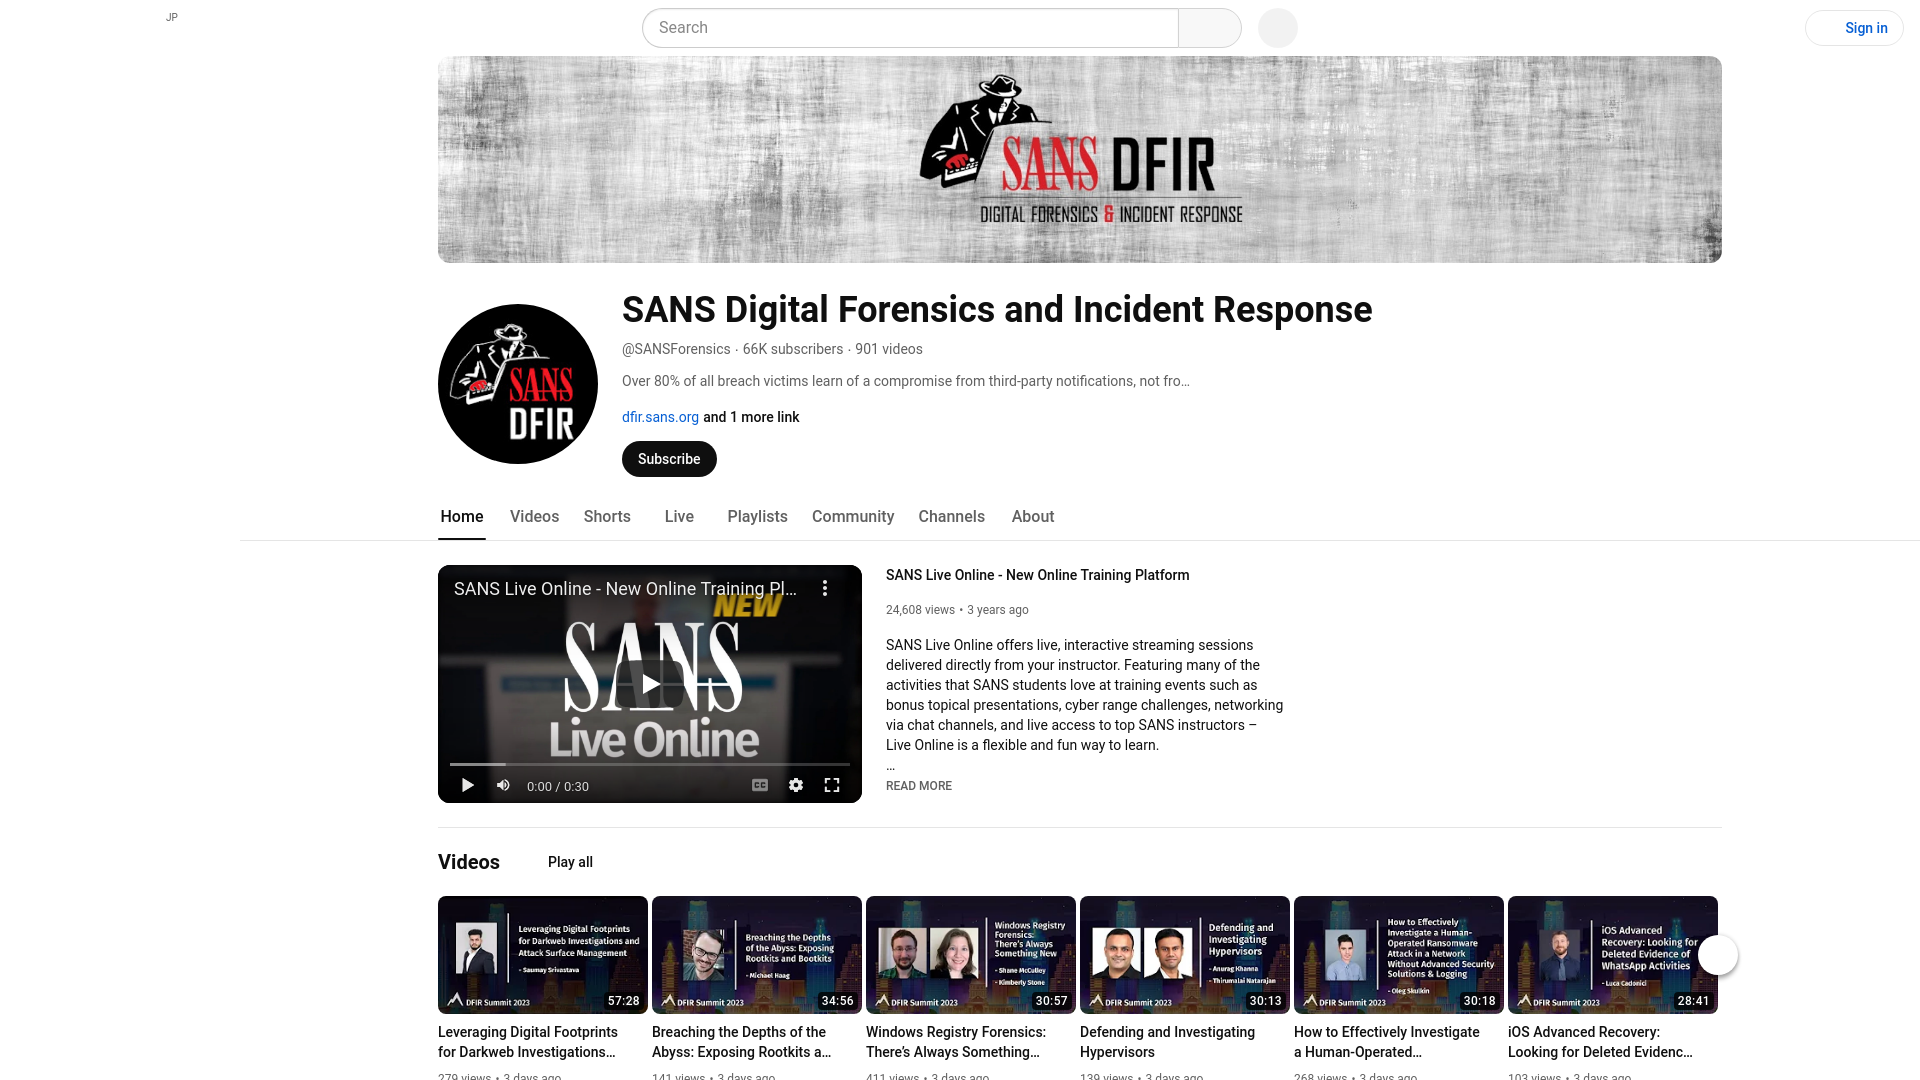 SANS Digital Forensics and Incident Response - YouTube